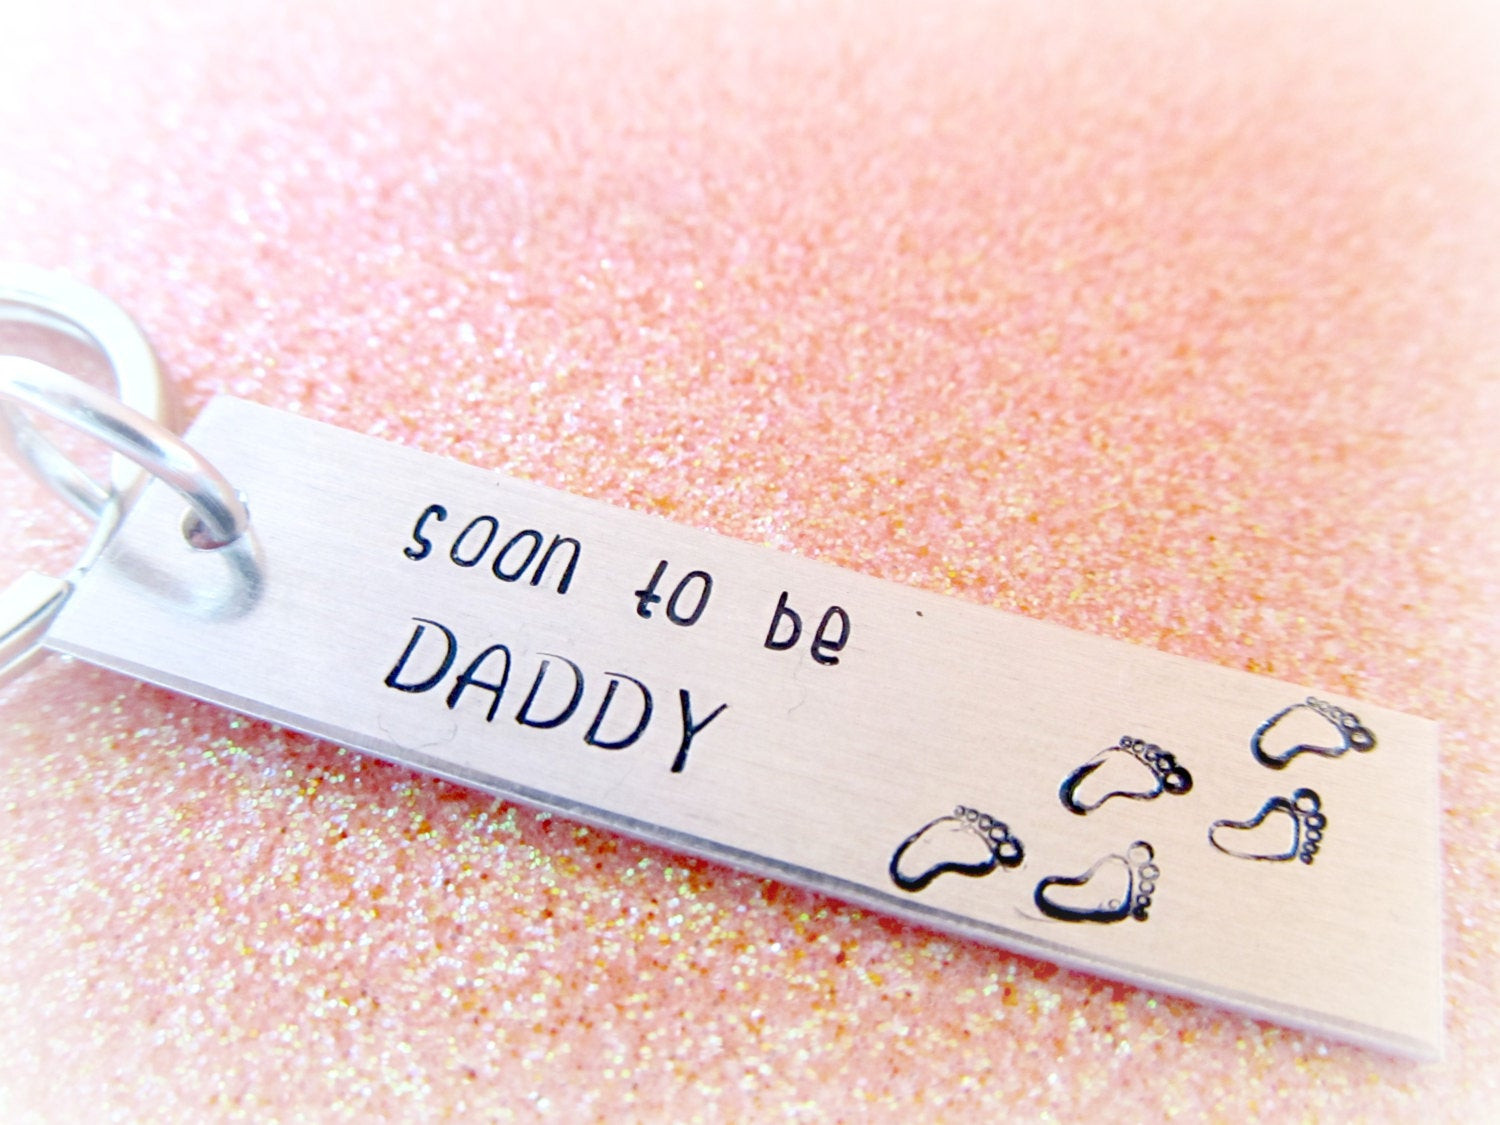 Fathers Day Gift Ideas For Soon To Be Dads
 Pregnancy Announcement for Dad Soon to be Daddy Daddy Gifts